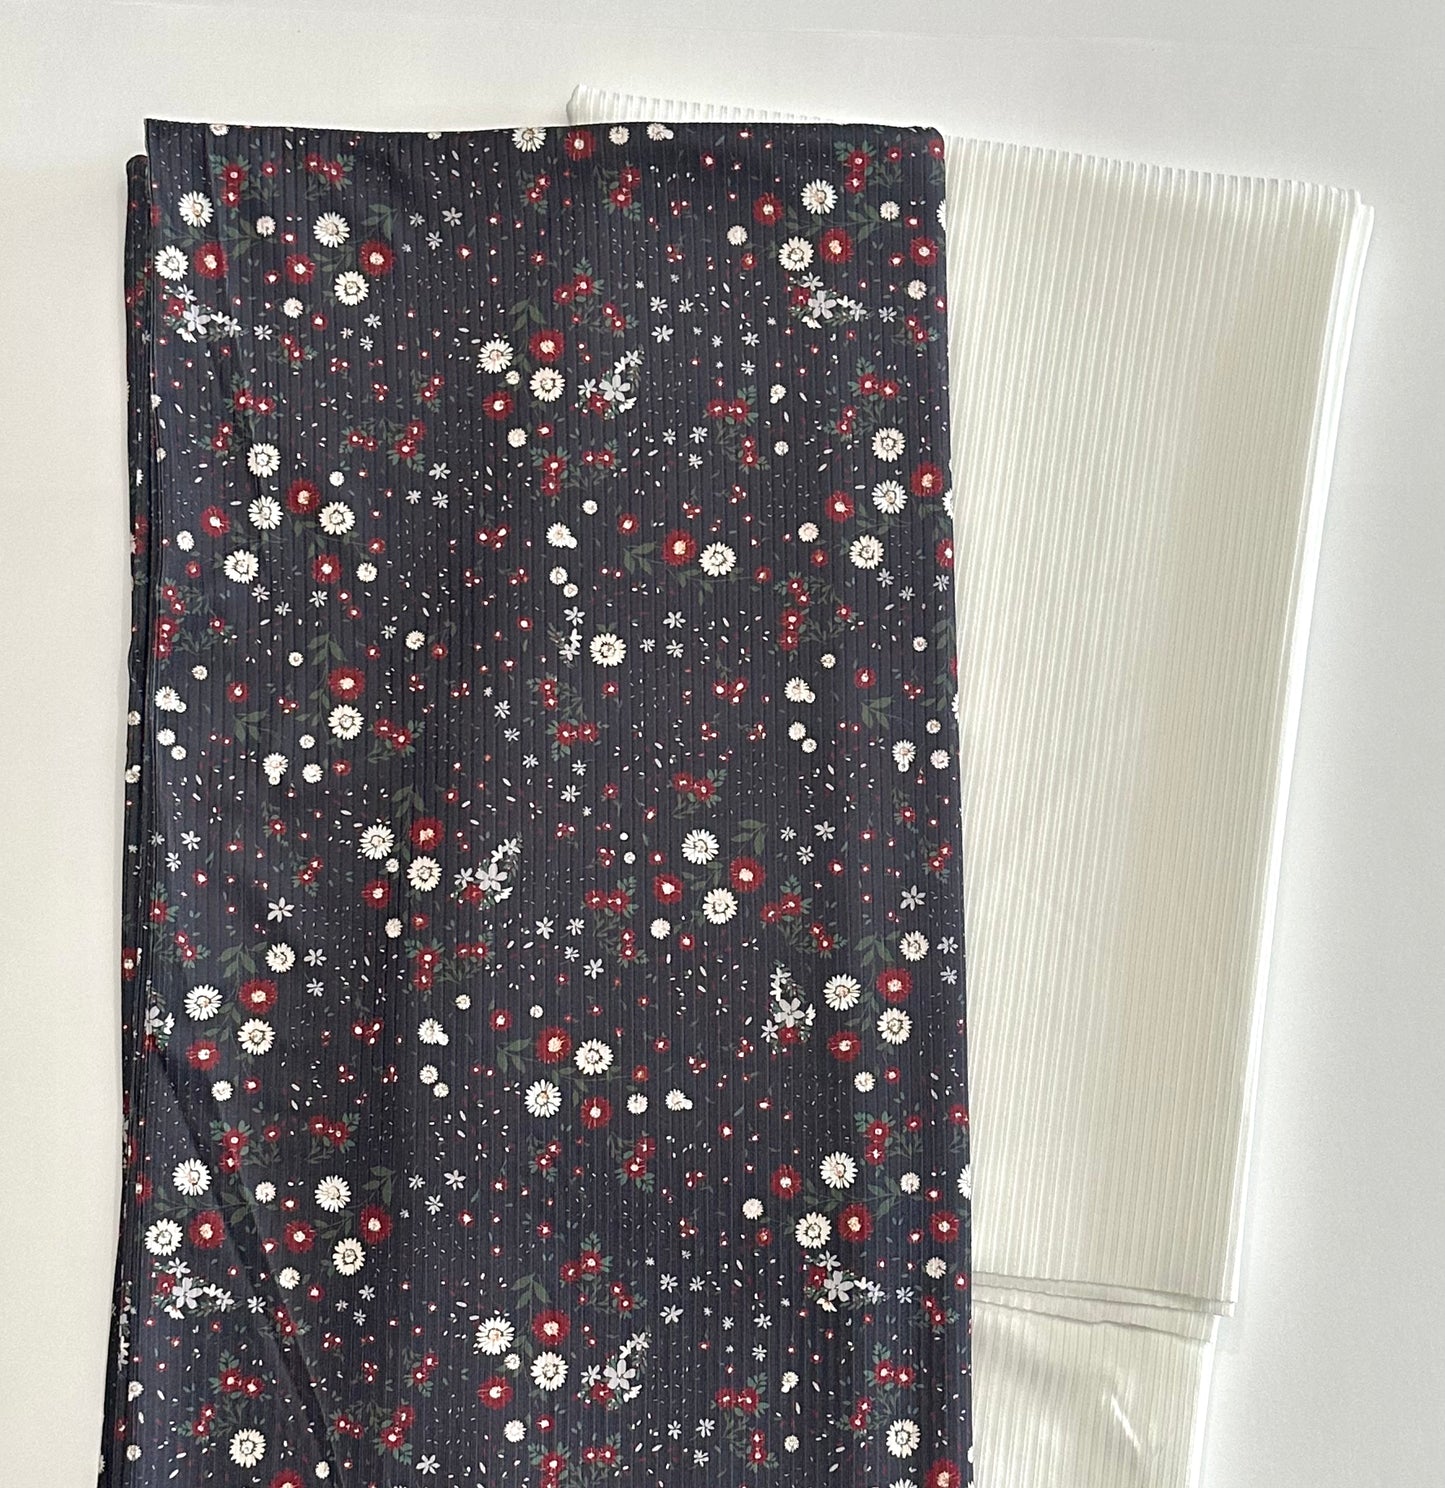 Yara Floral in Navy on Unbrushed Rib Knit Fabric Sold by the 1/4 yard